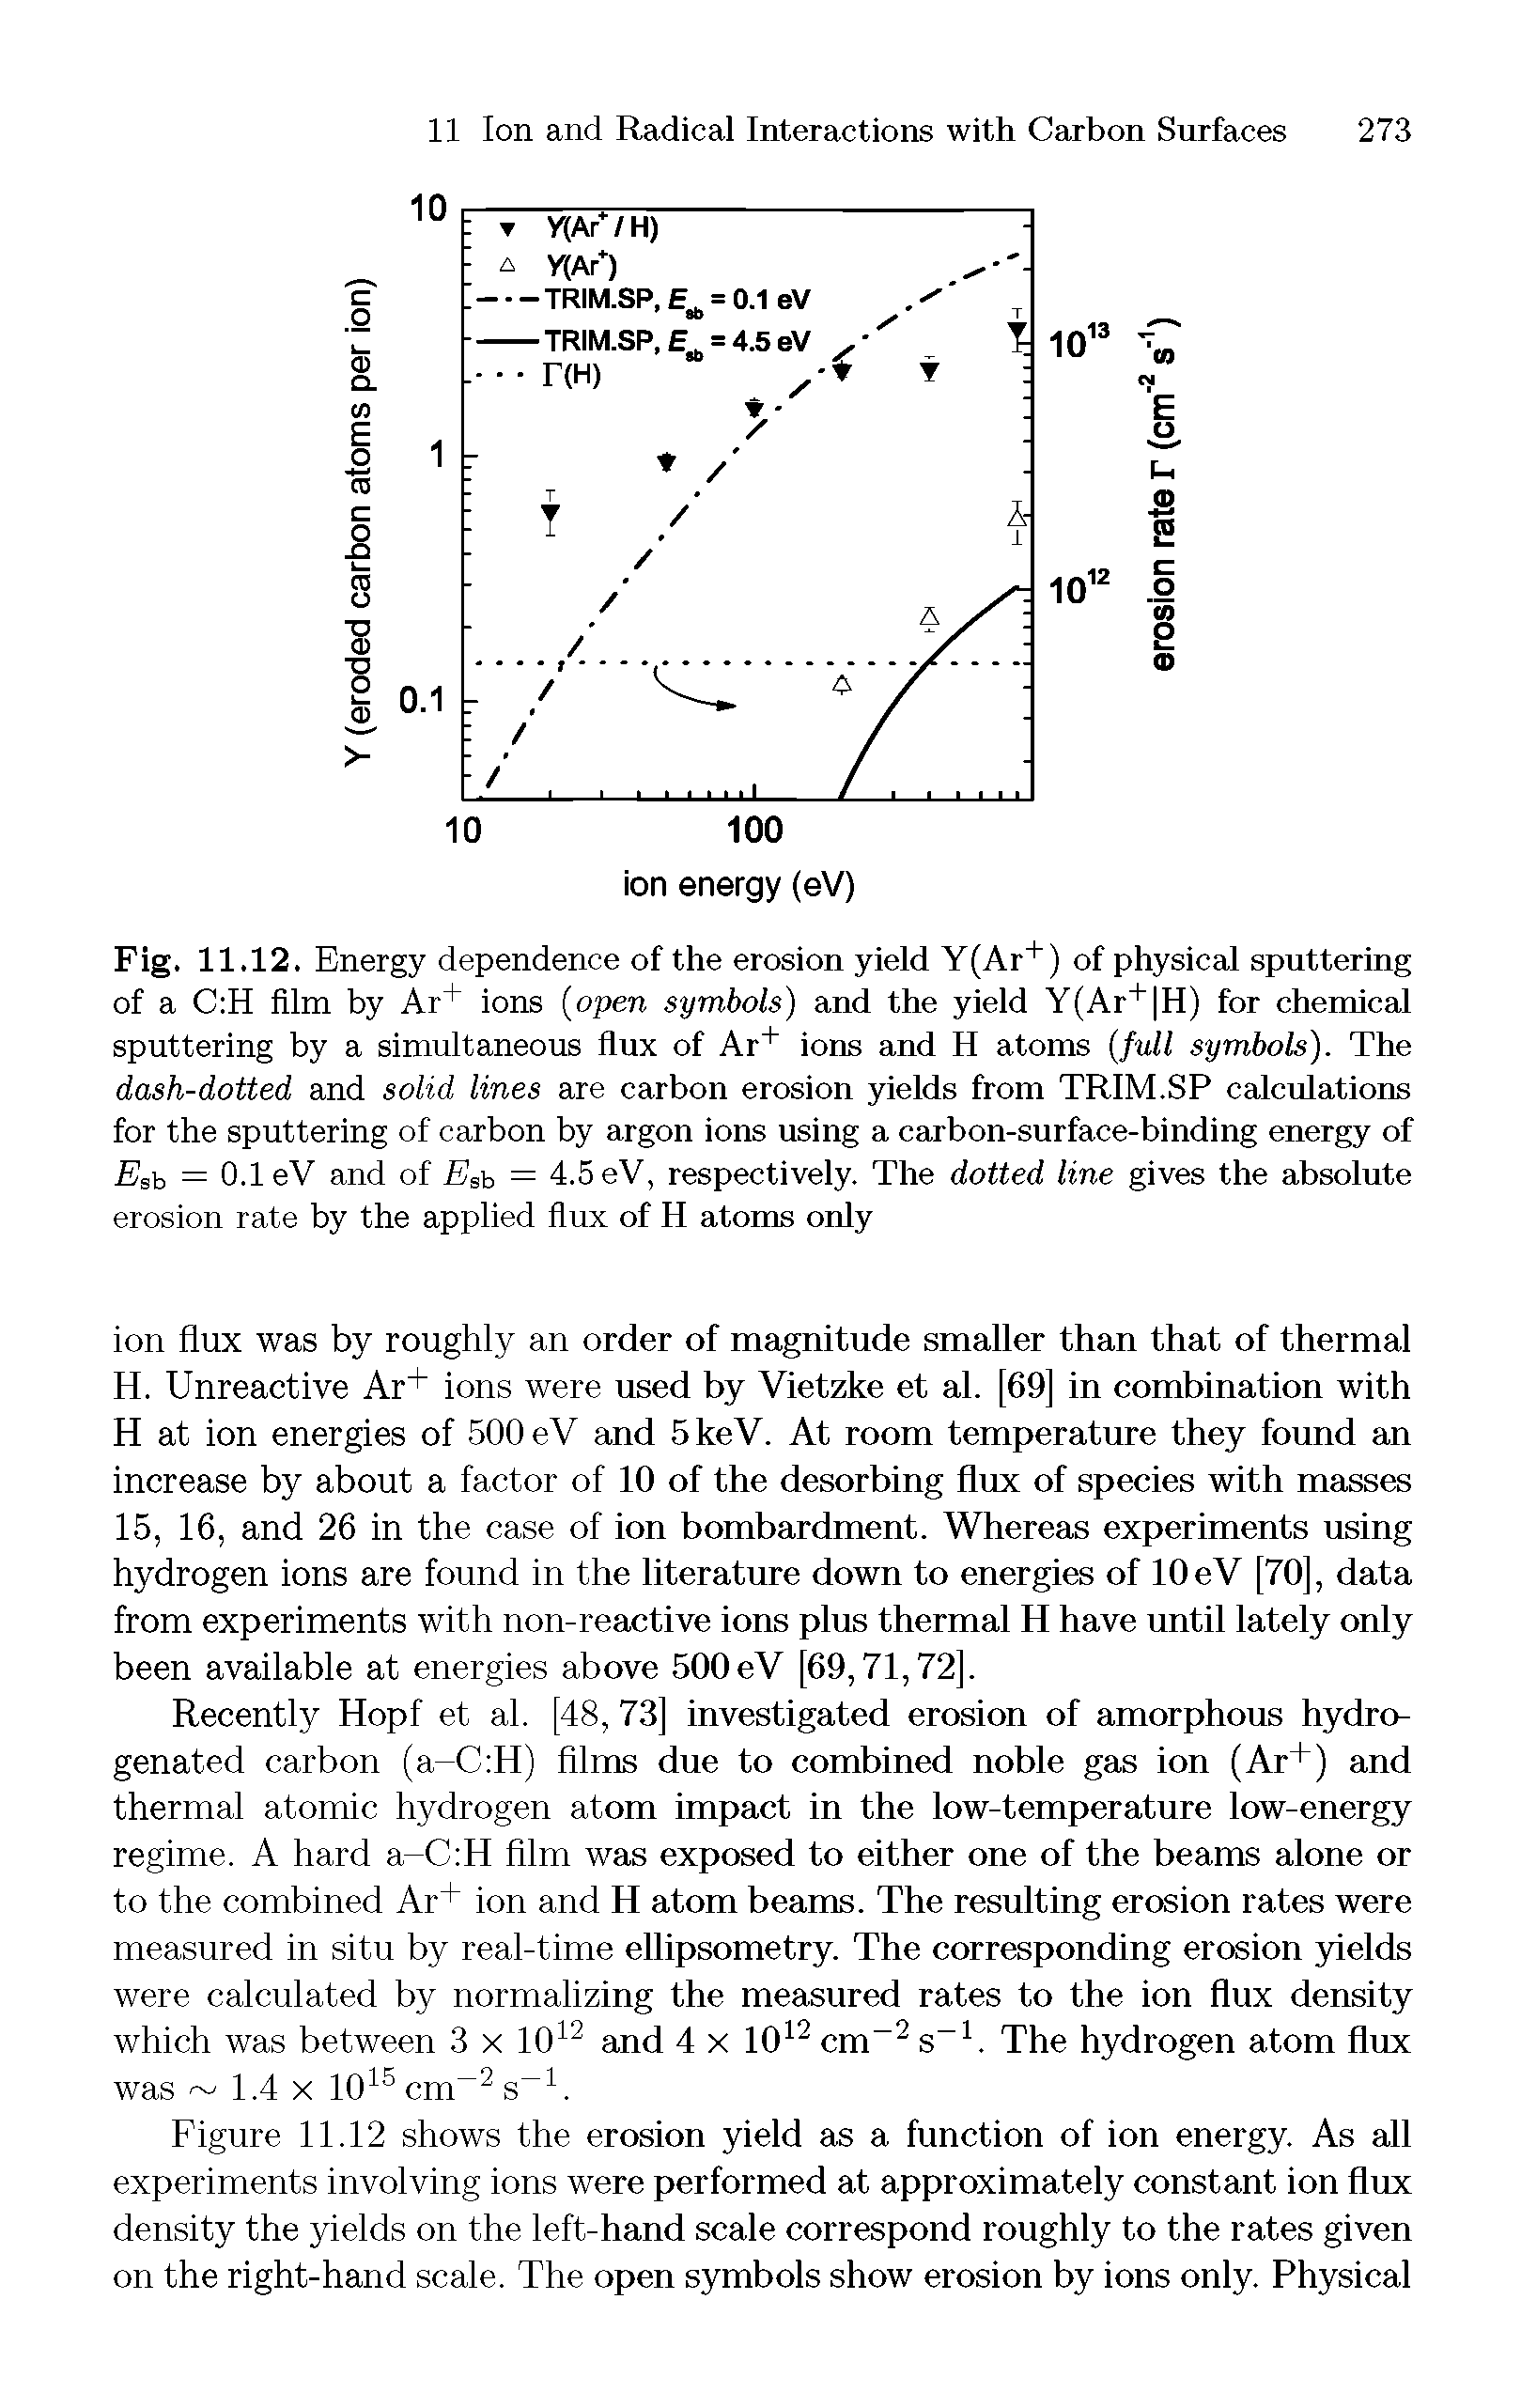 Fig. 11.12. Energy dependence of the erosion yield Y(Ar+) of physical sputtering of a C H film by Ar+ ions (open symbols) and the yield Y(Ar+ H) for chemical sputtering by a simultaneous flux of Ar+ ions and H atoms (full symbols). The dash-dotted and solid lines are carbon erosion yields from TRIM.SP calculations for the sputtering of carbon by argon ions using a carbon-surface-binding energy of Esb = 0.1 eV and of EBb = 4.5 eV, respectively. The dotted line gives the absolute erosion rate by the applied flux of H atoms only...